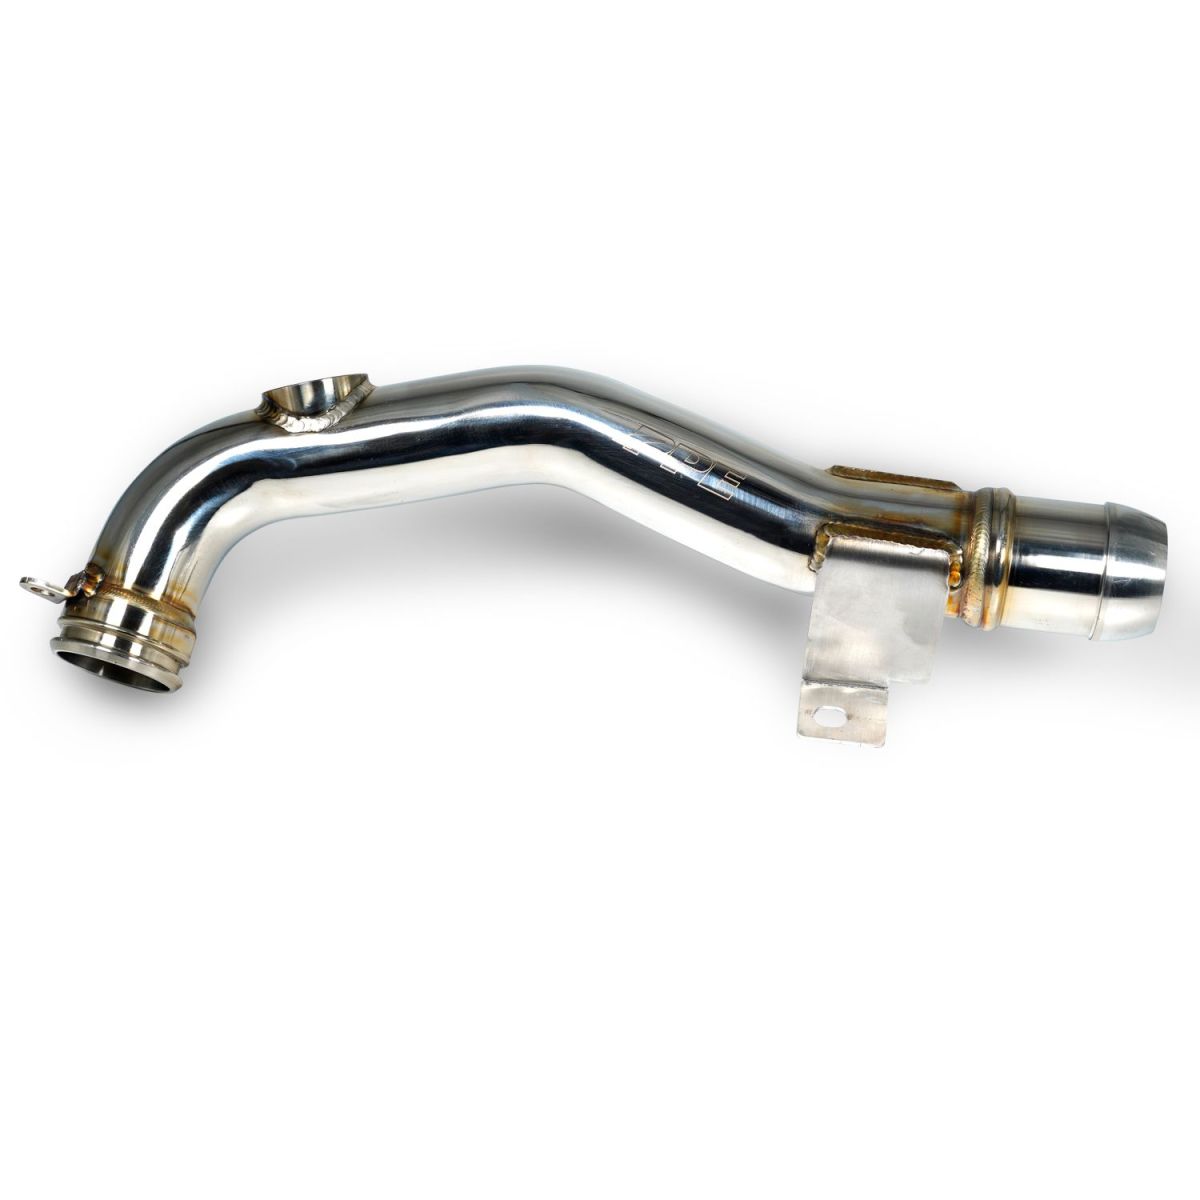 PPE - PPE Performance 304 Stainless Steel Engine Coolant Return Pipe (Polished) For 01-04 LB7 Duramax